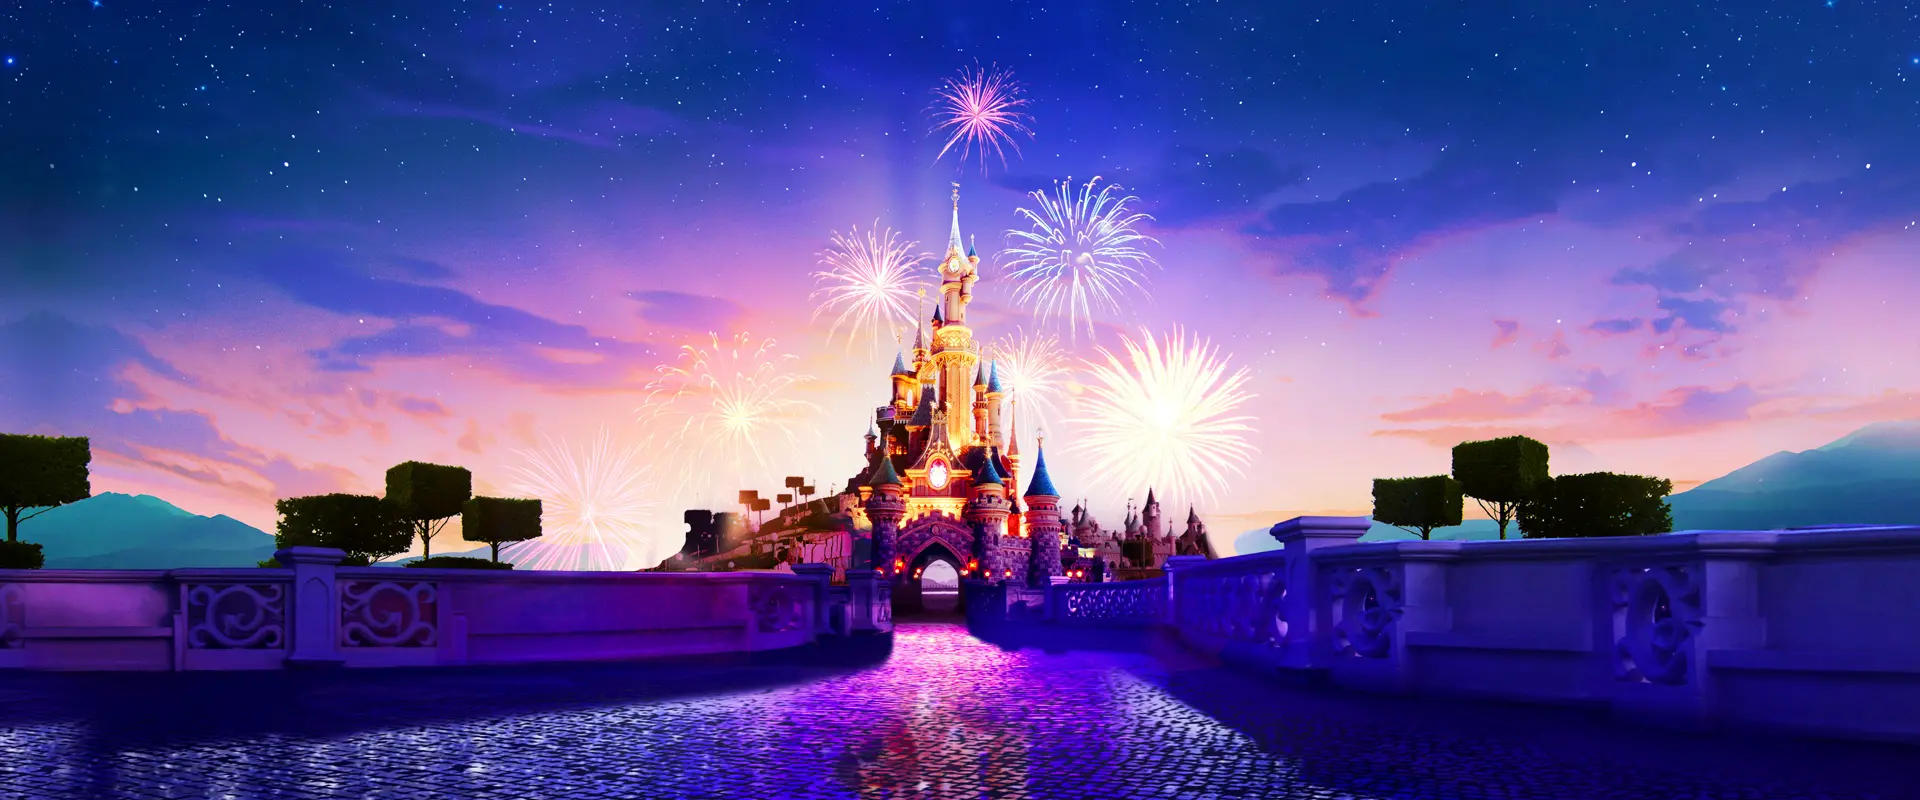 What Are the Opening Times for Disneyland Paris?